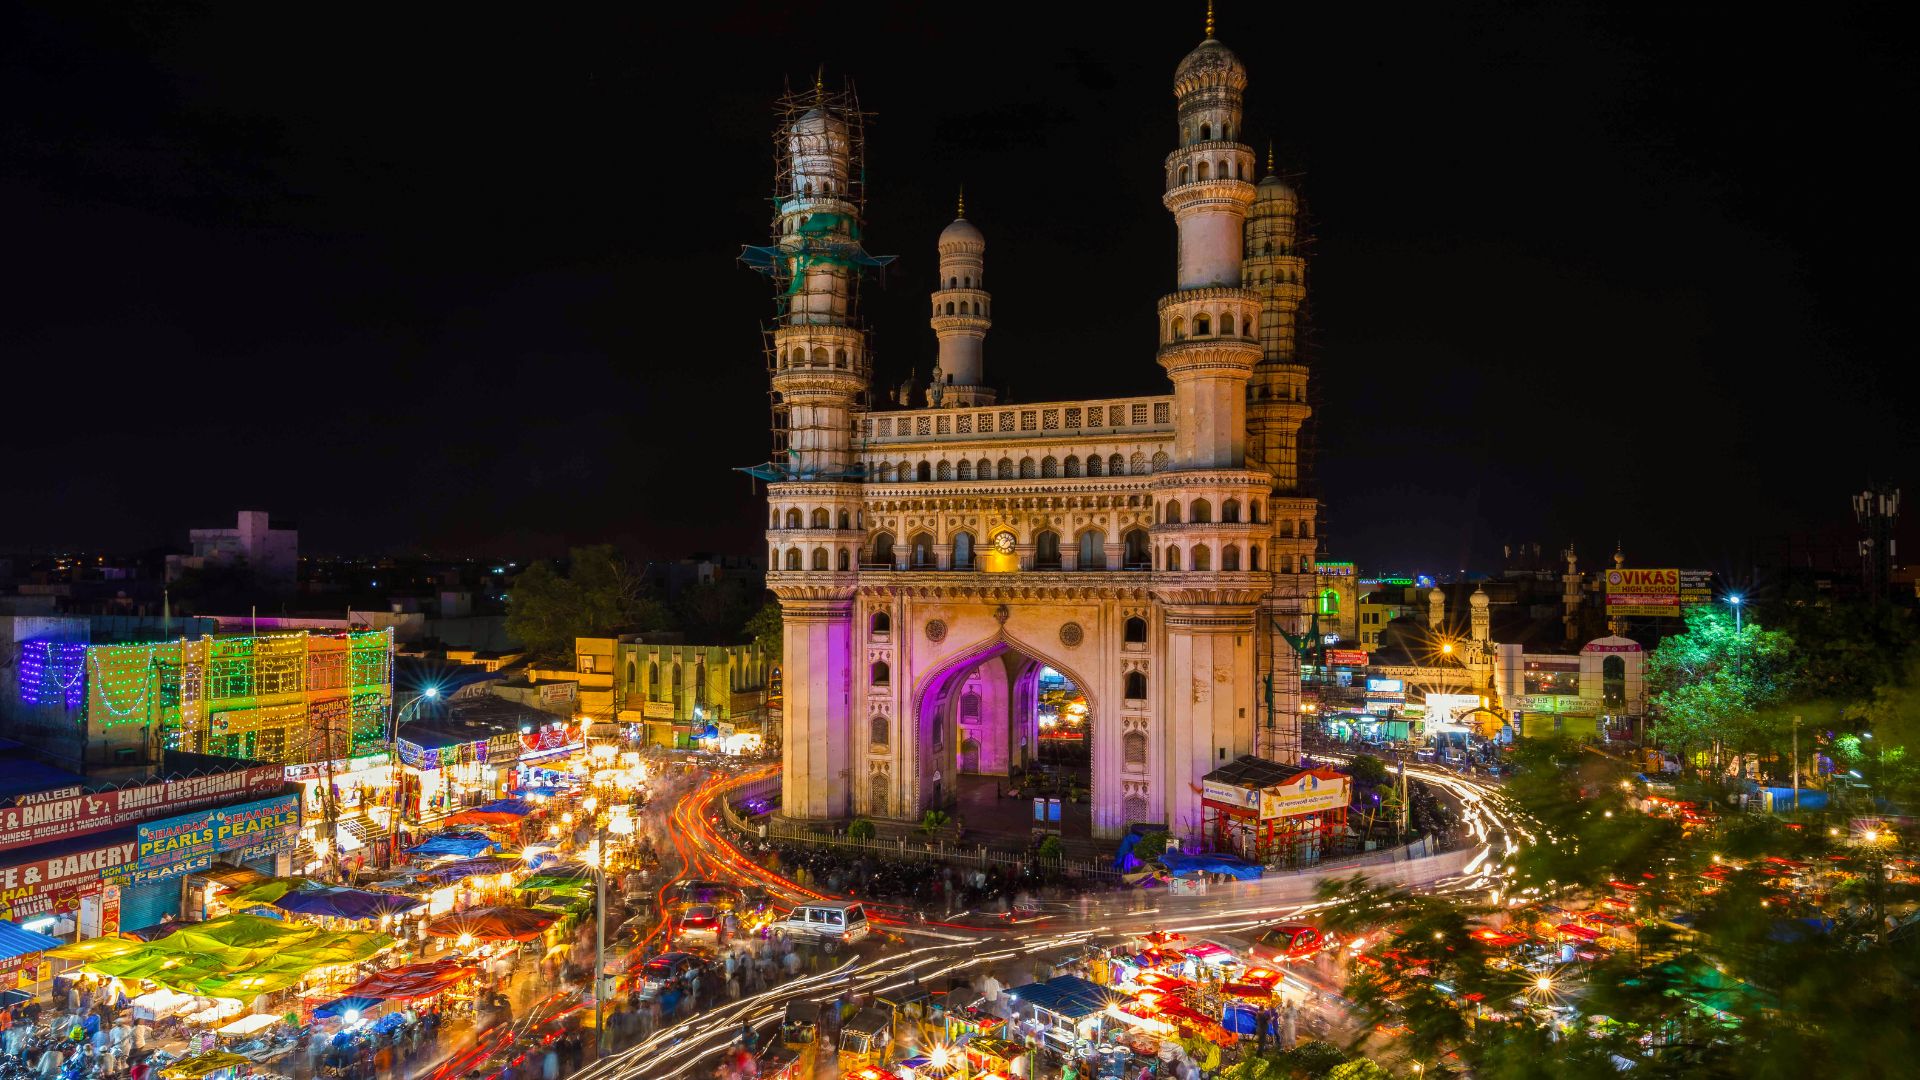 Hyderabad Pin codes, History, Culture, Food, Attractions